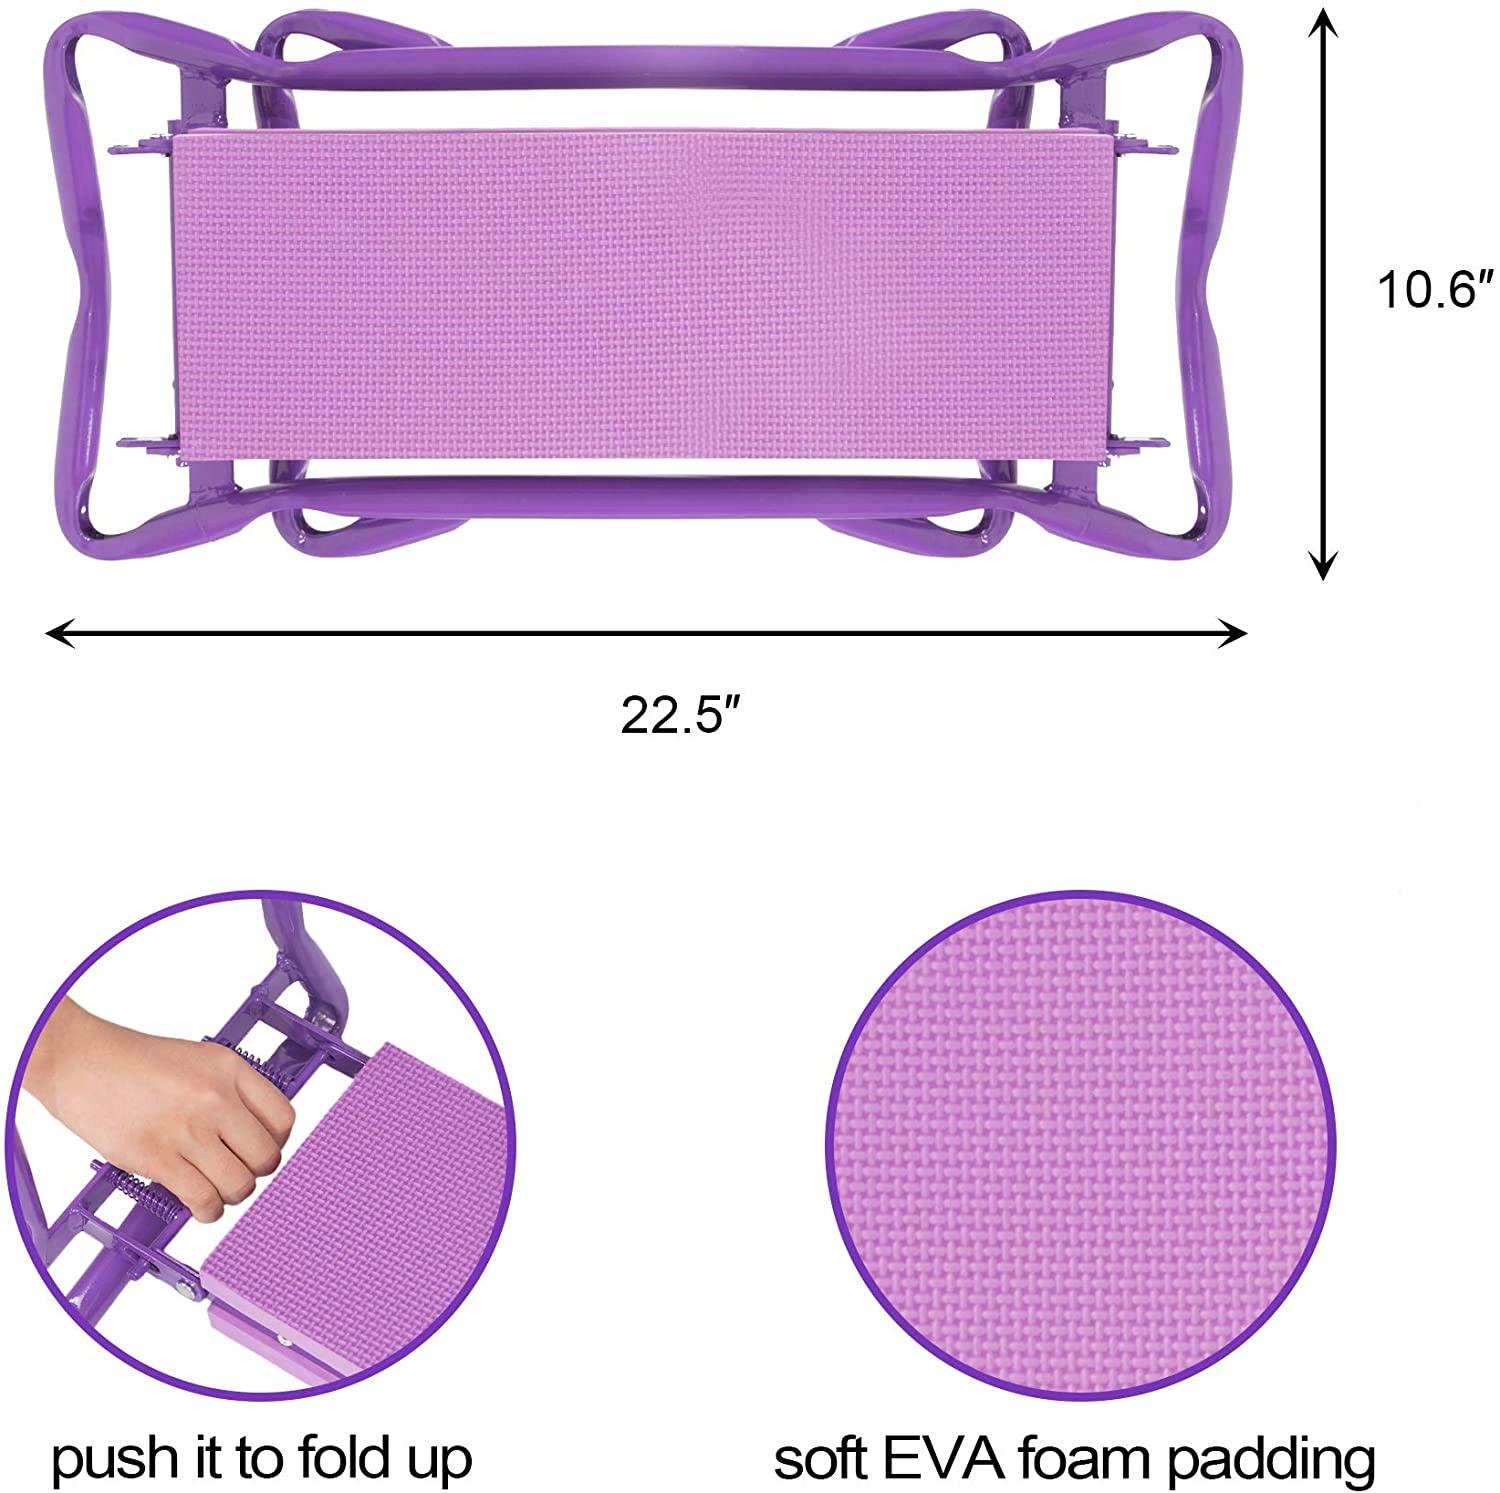 Garden Kneeler and Seat Folding Kneeling Bench Stool with Tool Pouches Soft EVA Foam for Gardening, Purple - Bosonshop